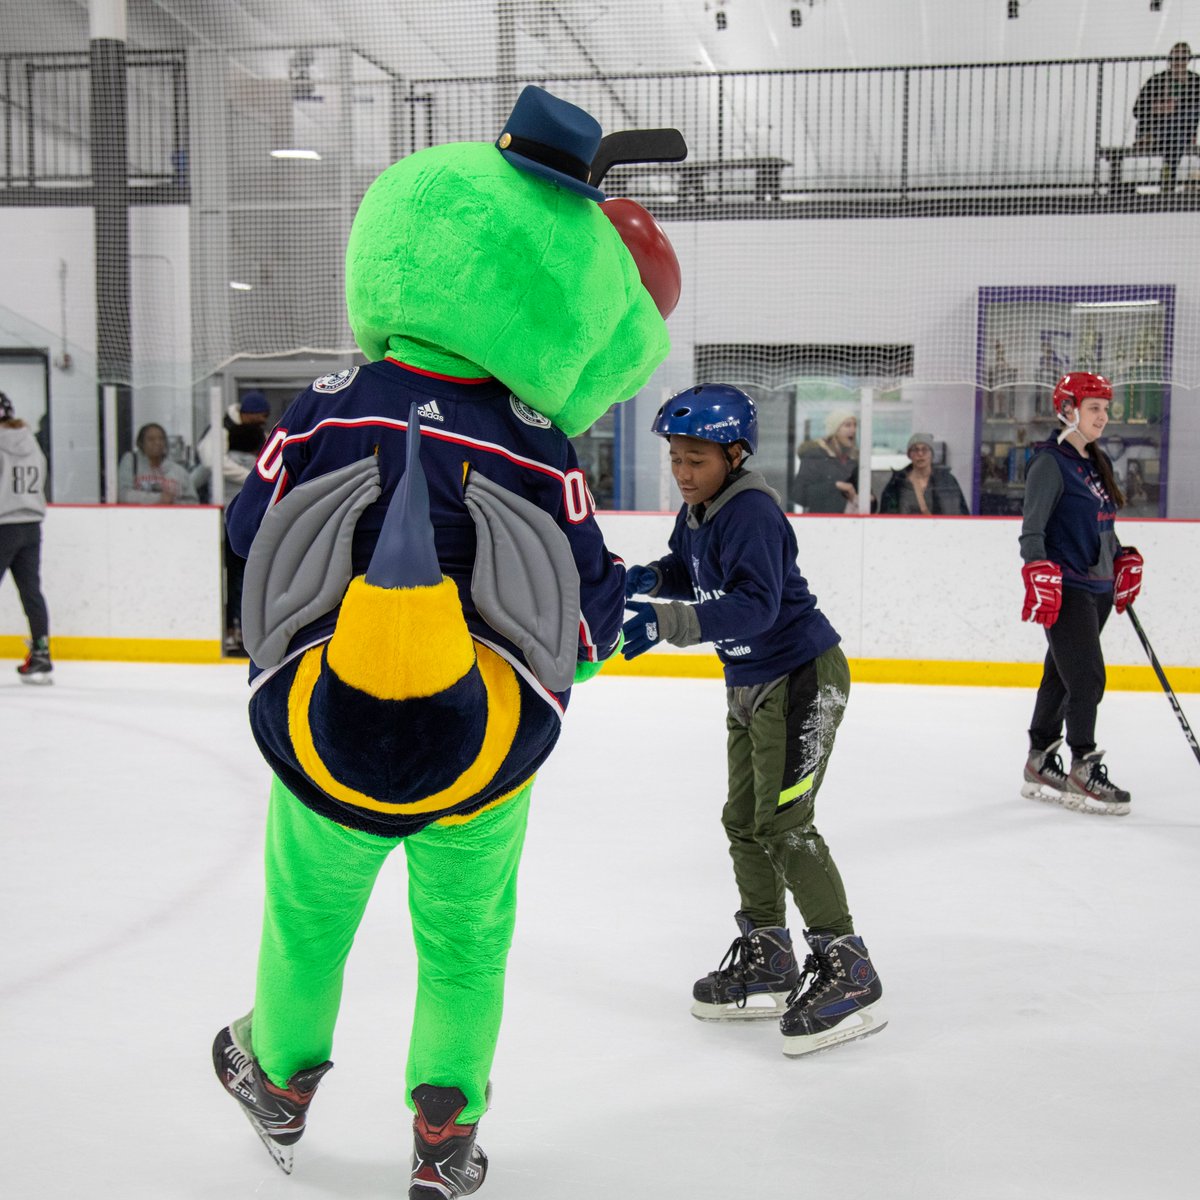 We had a blast at the rink with @OSULiFESports at Get Out And Learn, pres. by @safelite in association with @apexpros1. The lessons on the ice taught more than hockey! Through hockey, these kids learned about self-control, effort, teamwork and social responsibility! #CBJ